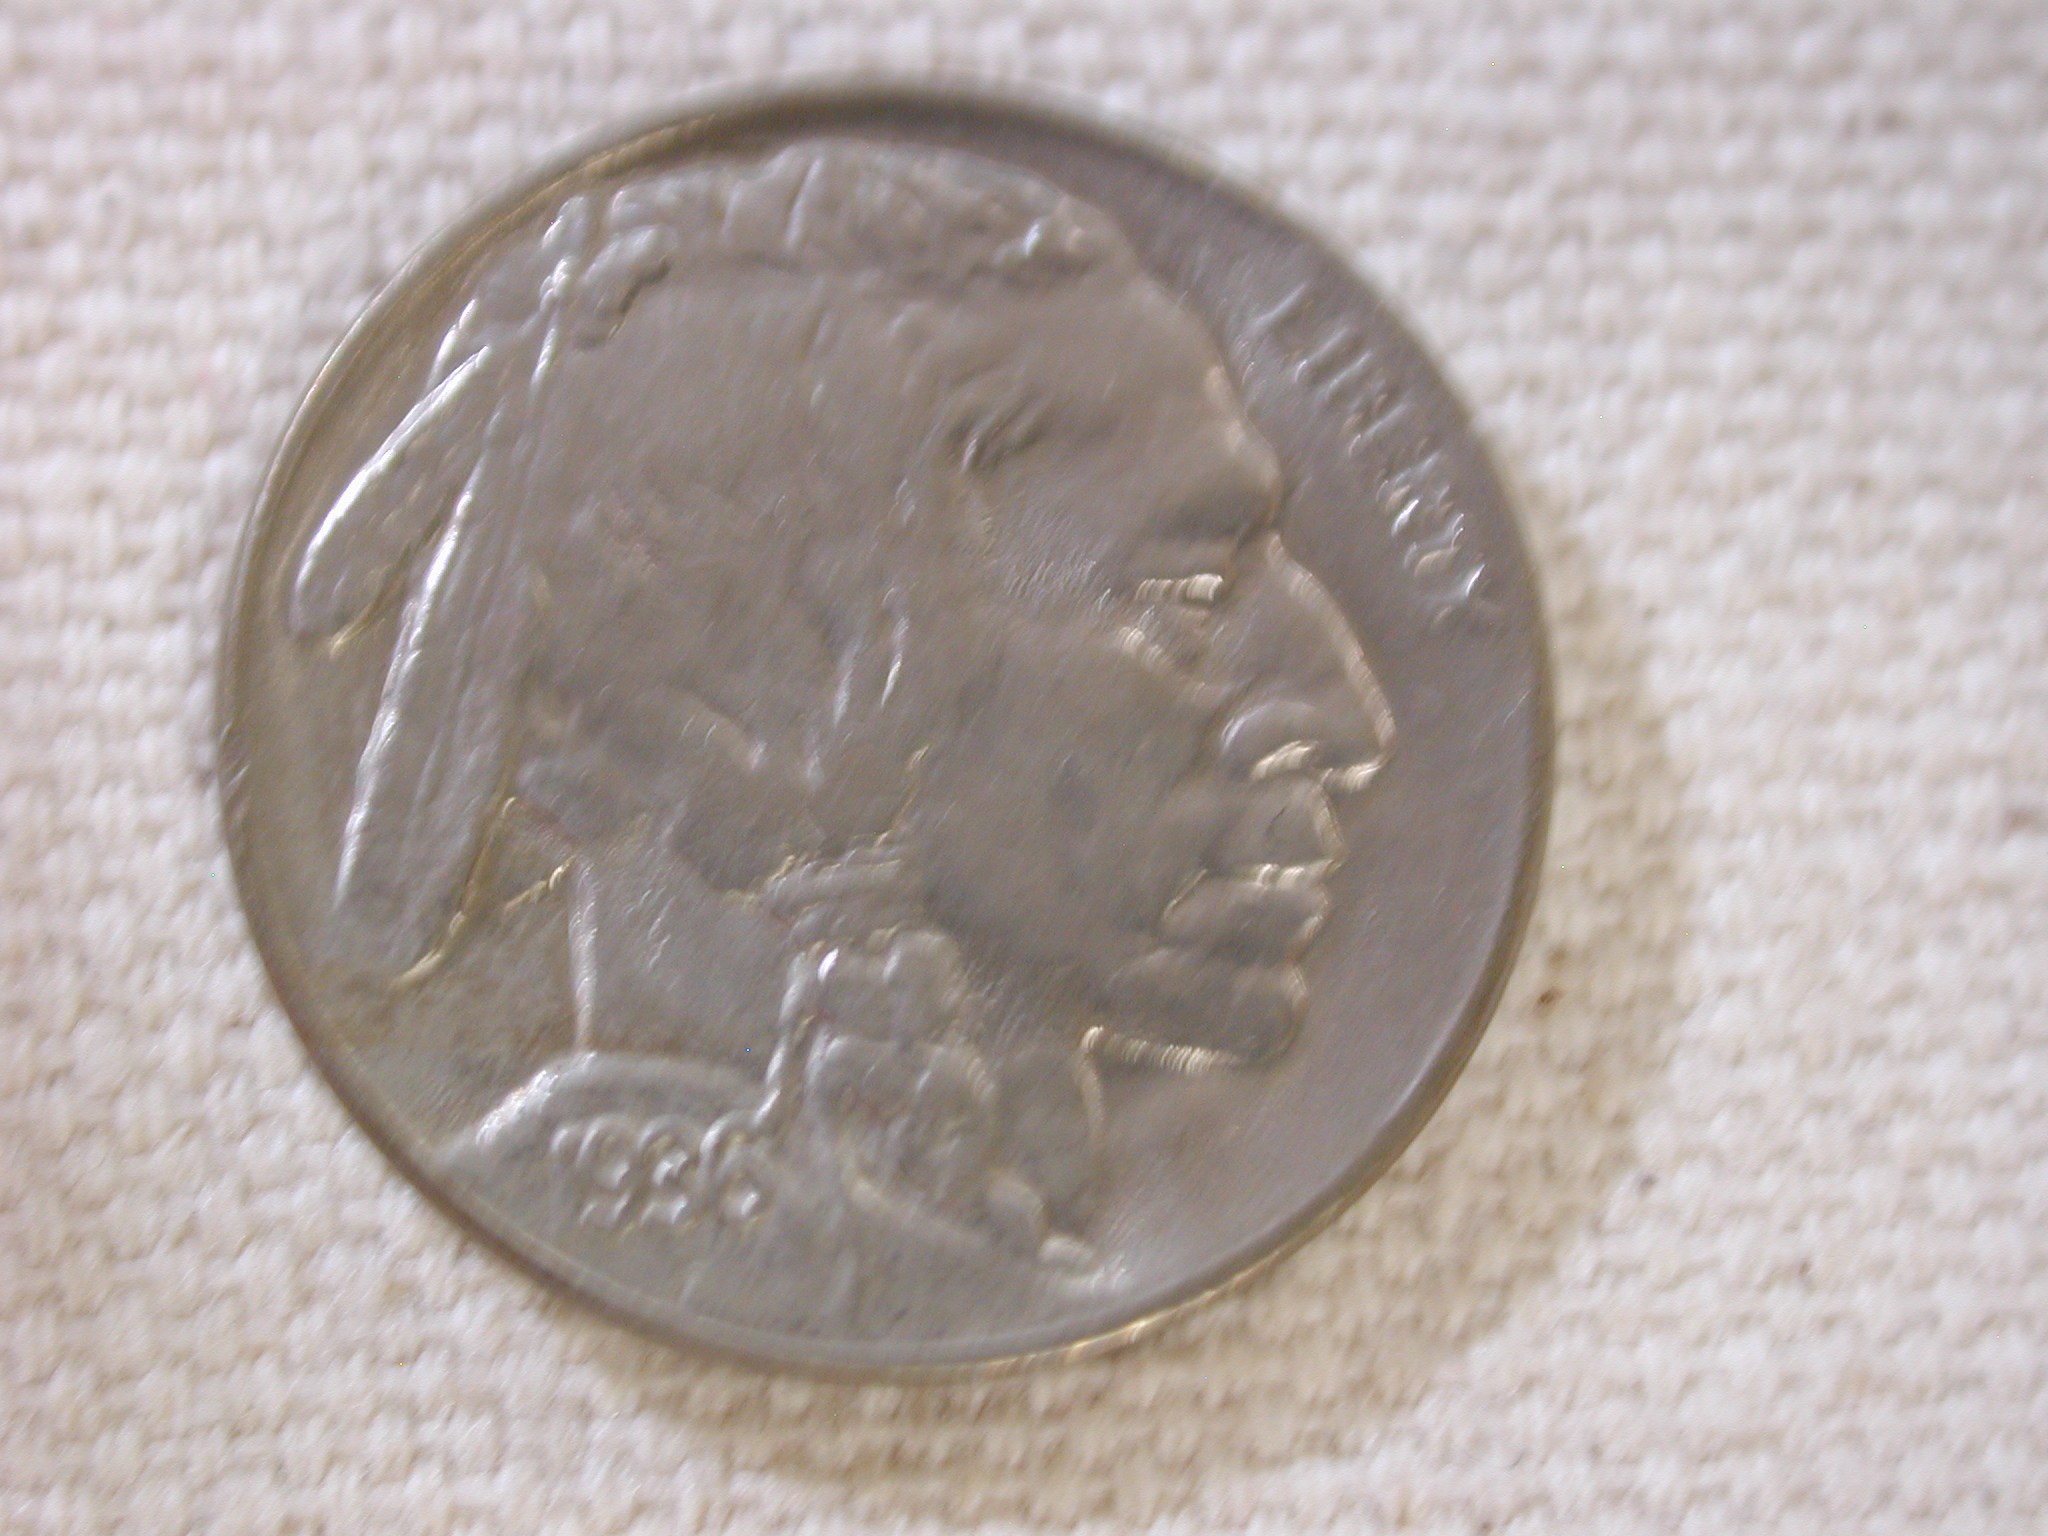 1936 U.S Five Cent Buffalo Nickel About Uncirculated